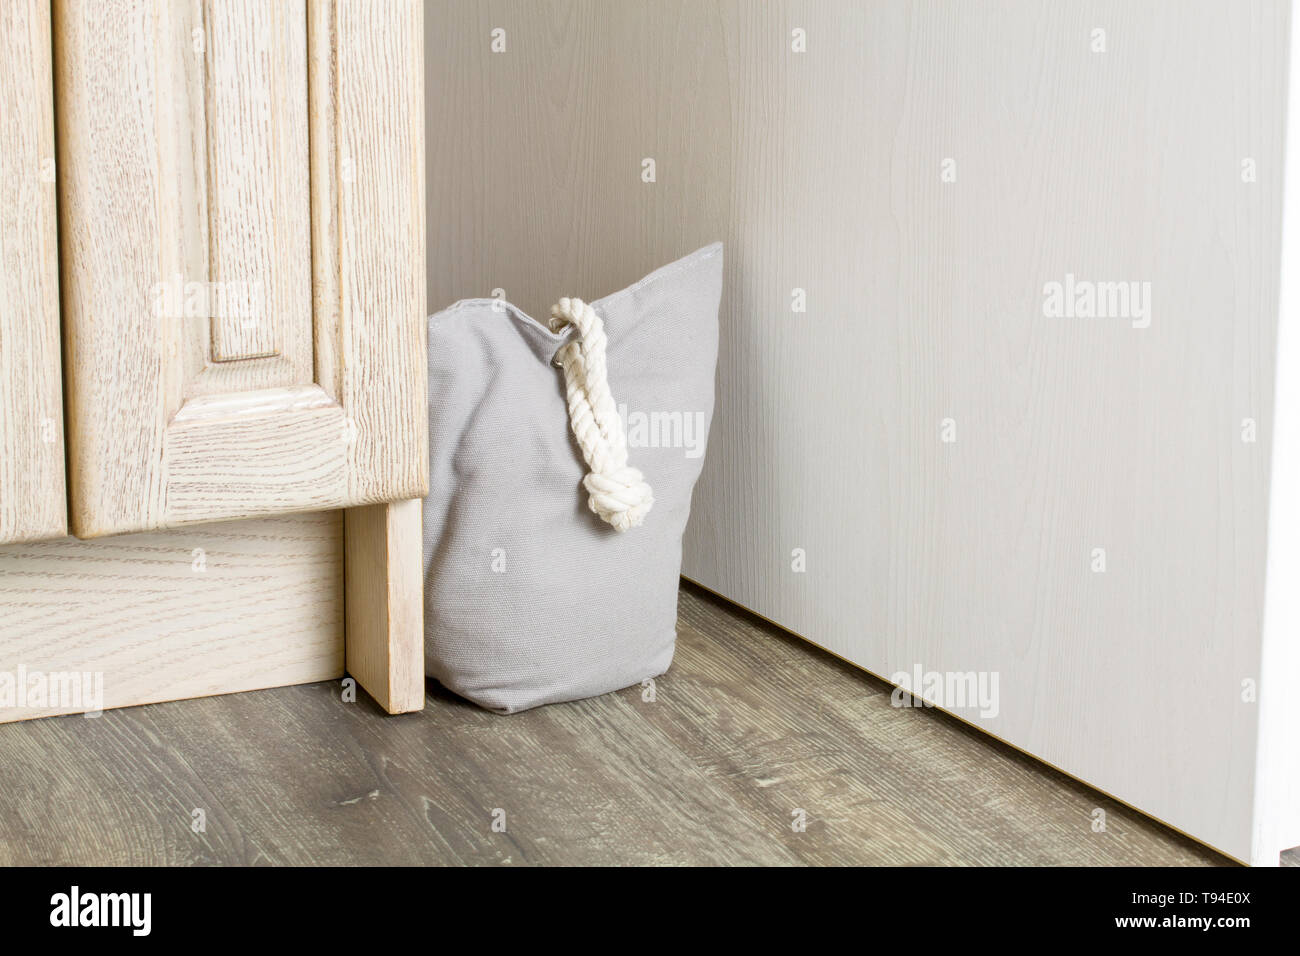 Vintage door stopper made of gray cloth with filling and handle rope Stock Photo